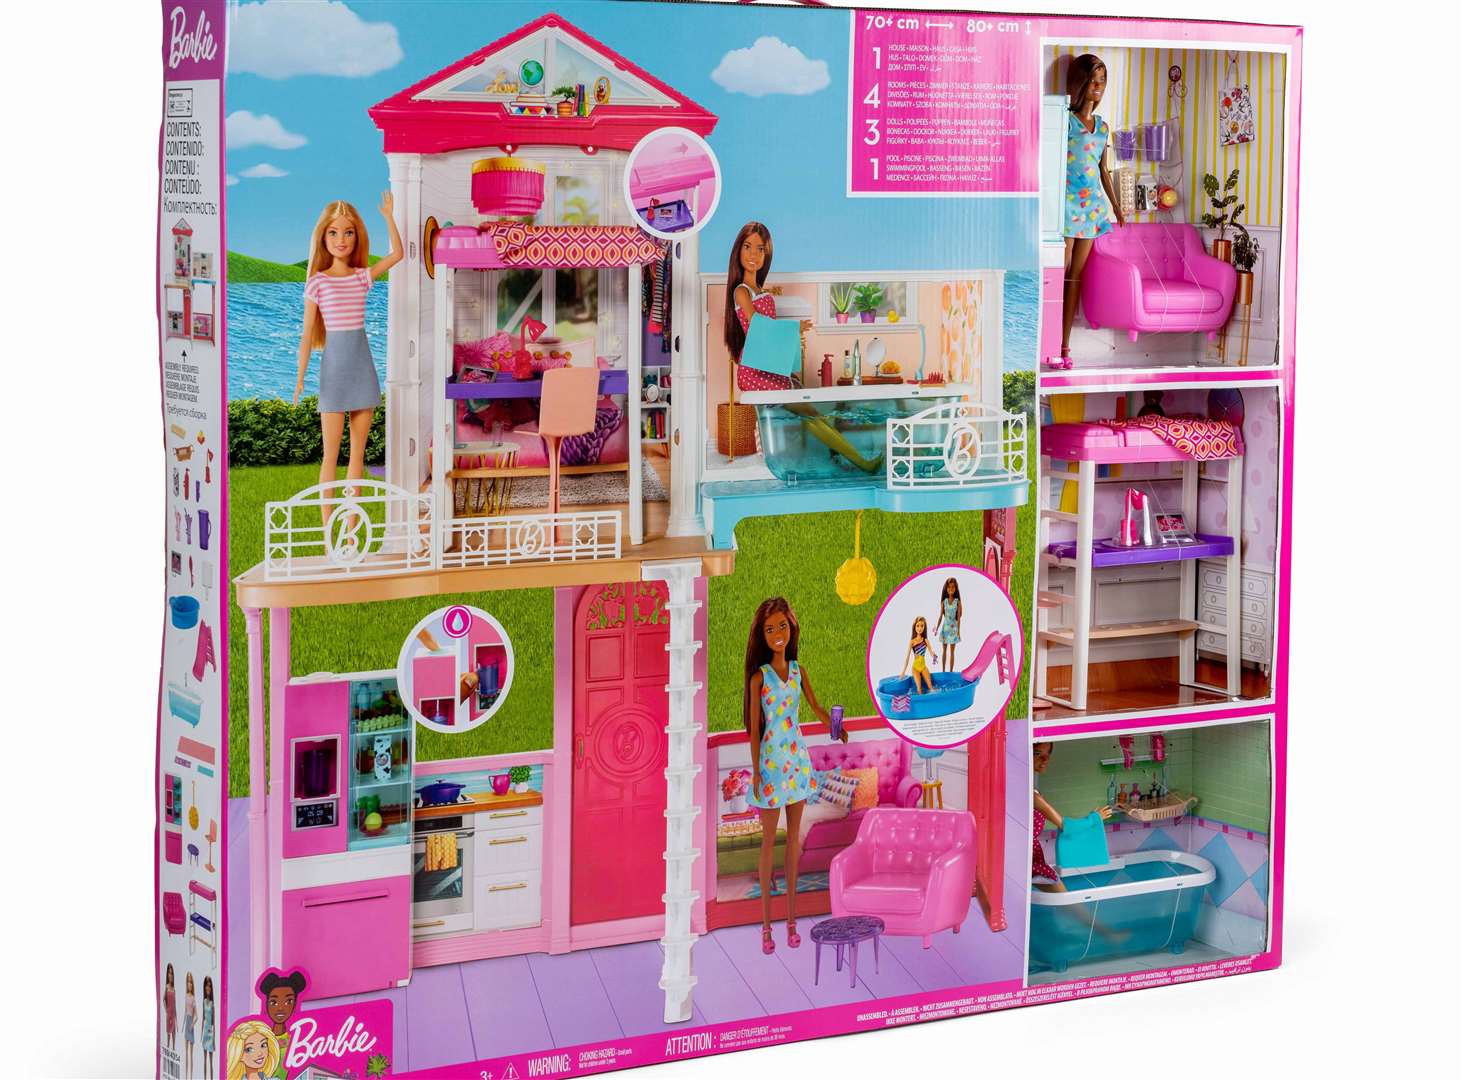 Argos has predicted what it thinks will be this year's most popular Christmas toys, including a Barbie house. Image: Argos.